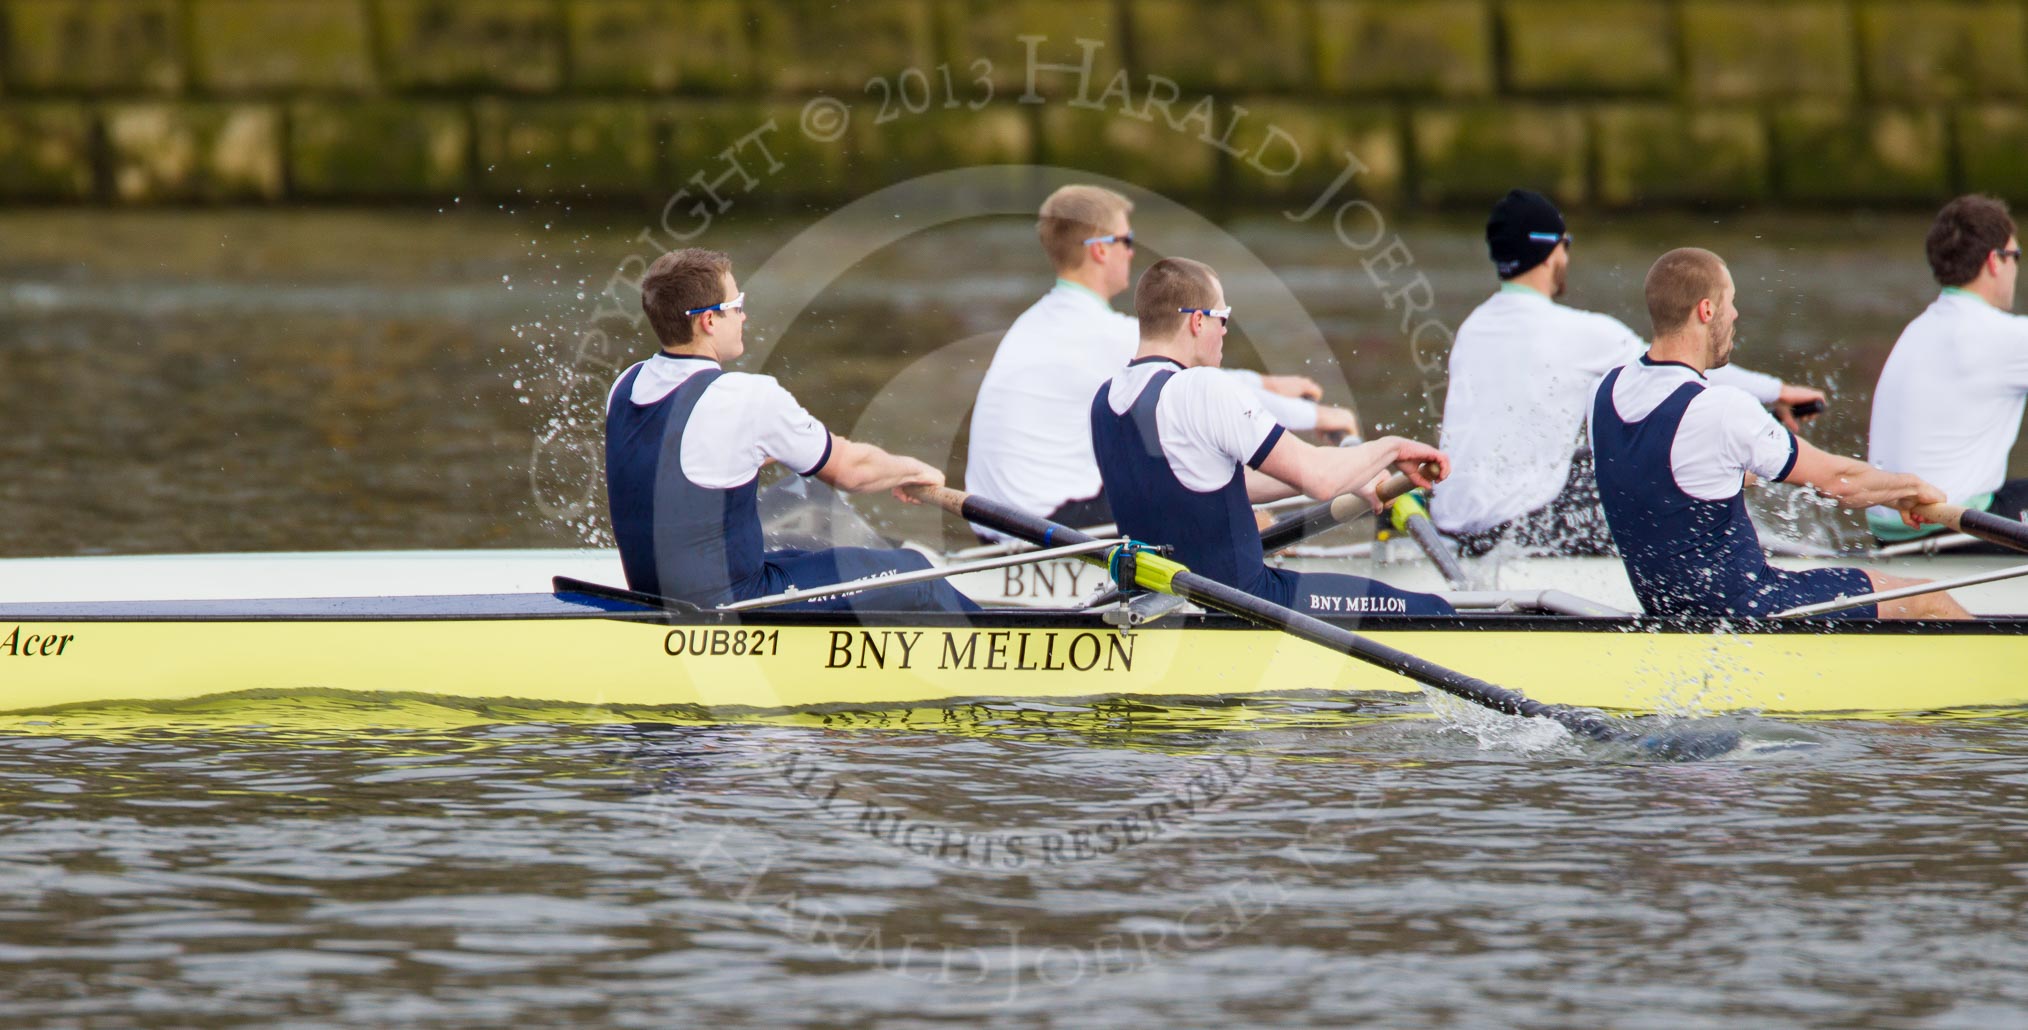 The Boat Race 2013.
Putney,
London SW15,

United Kingdom,
on 31 March 2013 at 16:31, image #279